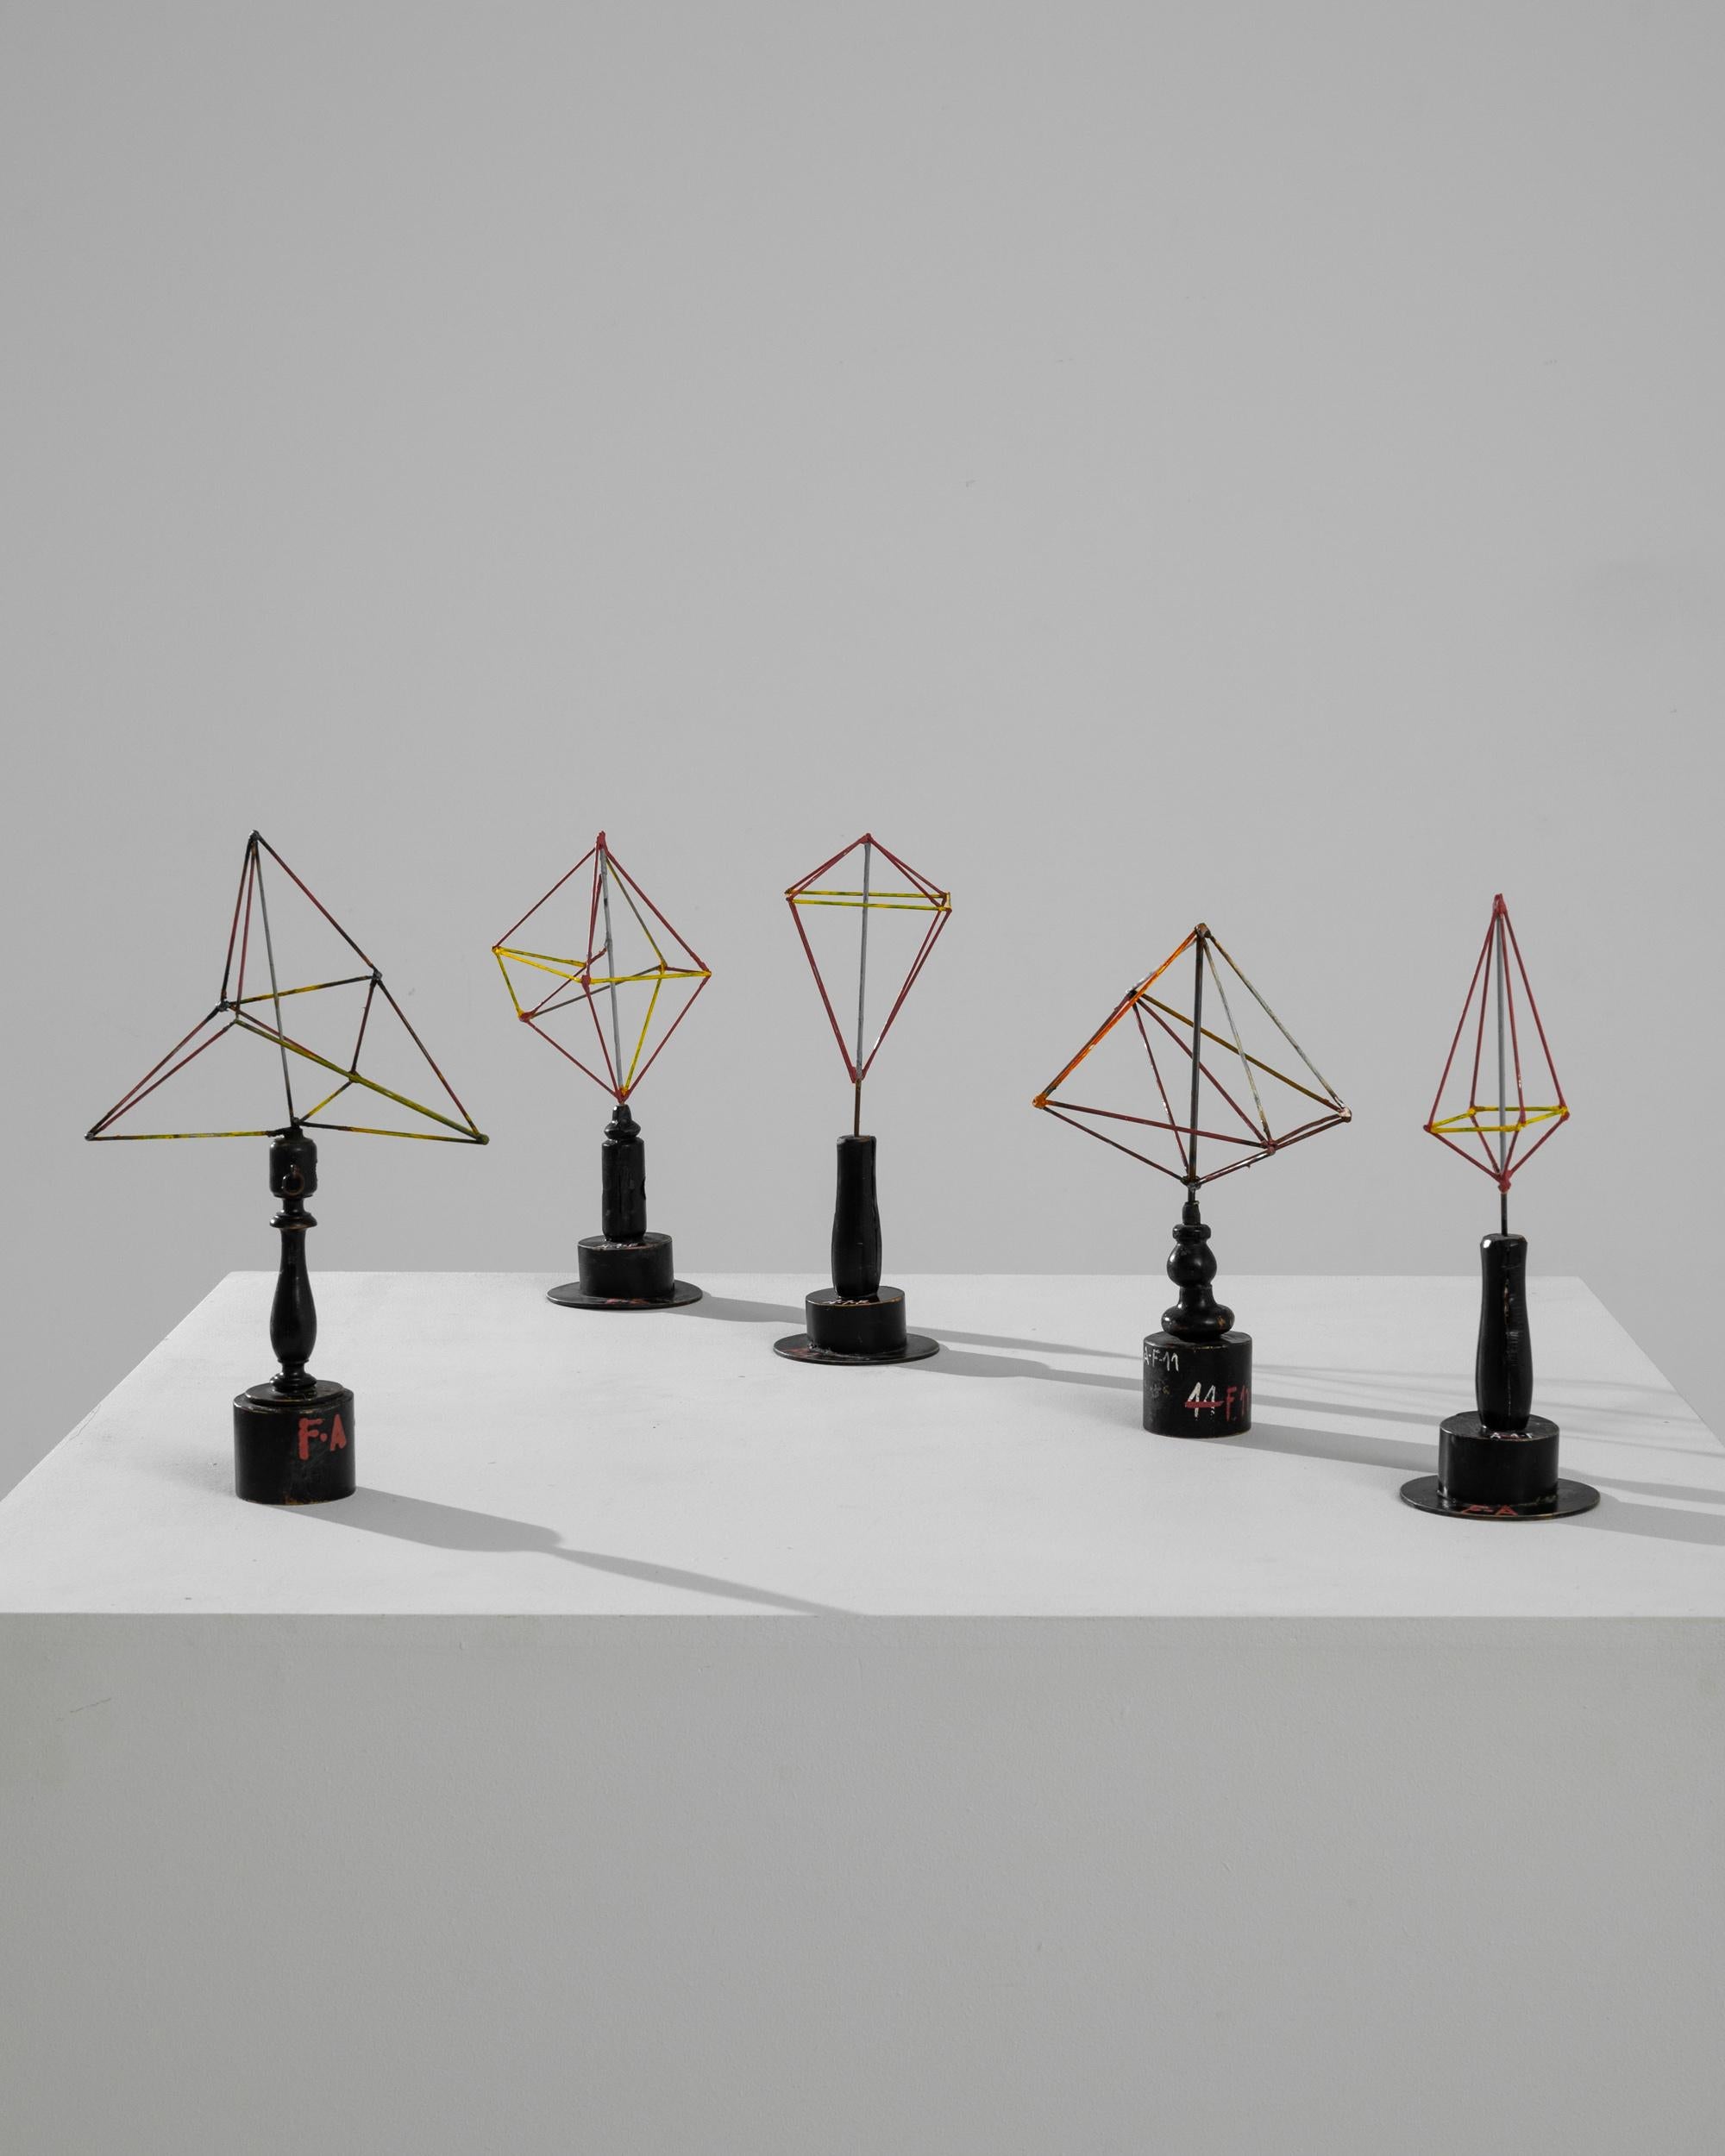 A vintage set of five metal decorative objects with wooden bases created in Czechia. Expressively applied vibrant paint and exposed welding joints engender a gritty playfulness in these geometric objects. The modern, minimalist forms of the metal